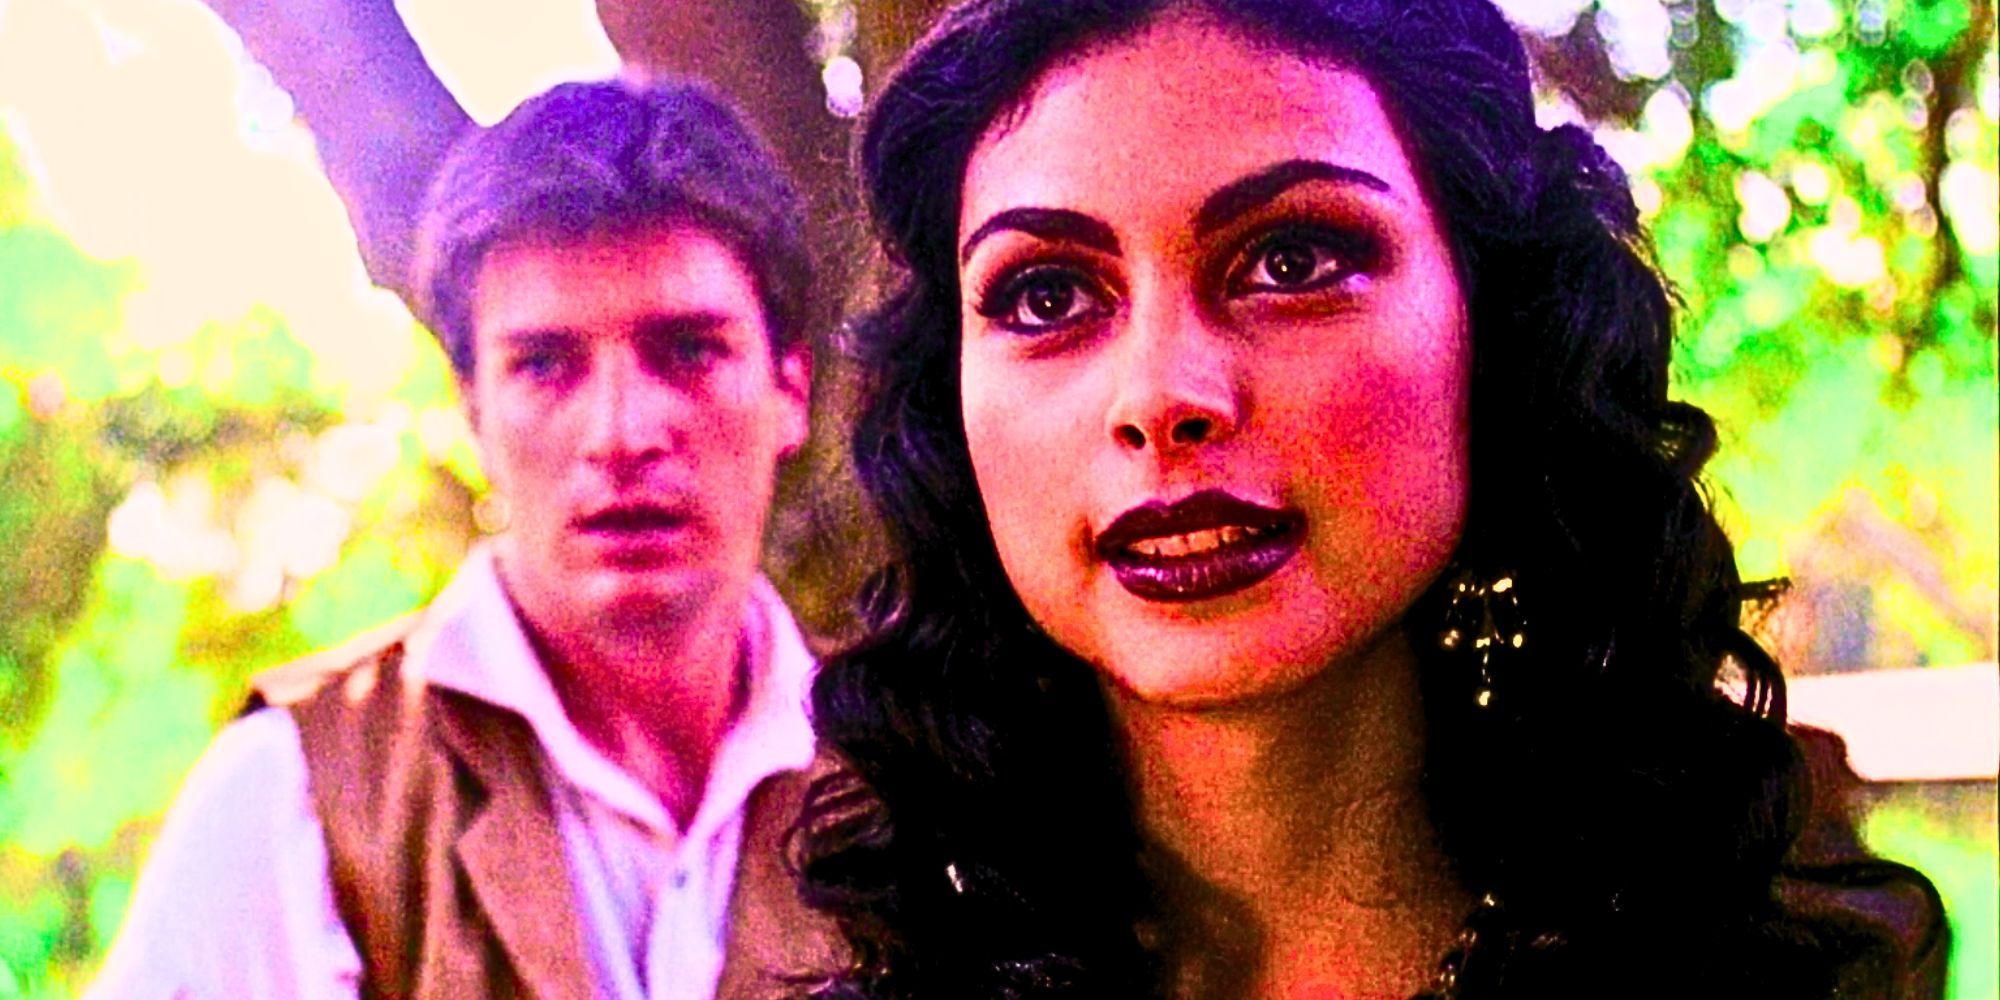 Morena Baccarin as Inara Serra in Firefly in the foreground as Nathan Fillion's Malcolm Reynolds cowers in the background